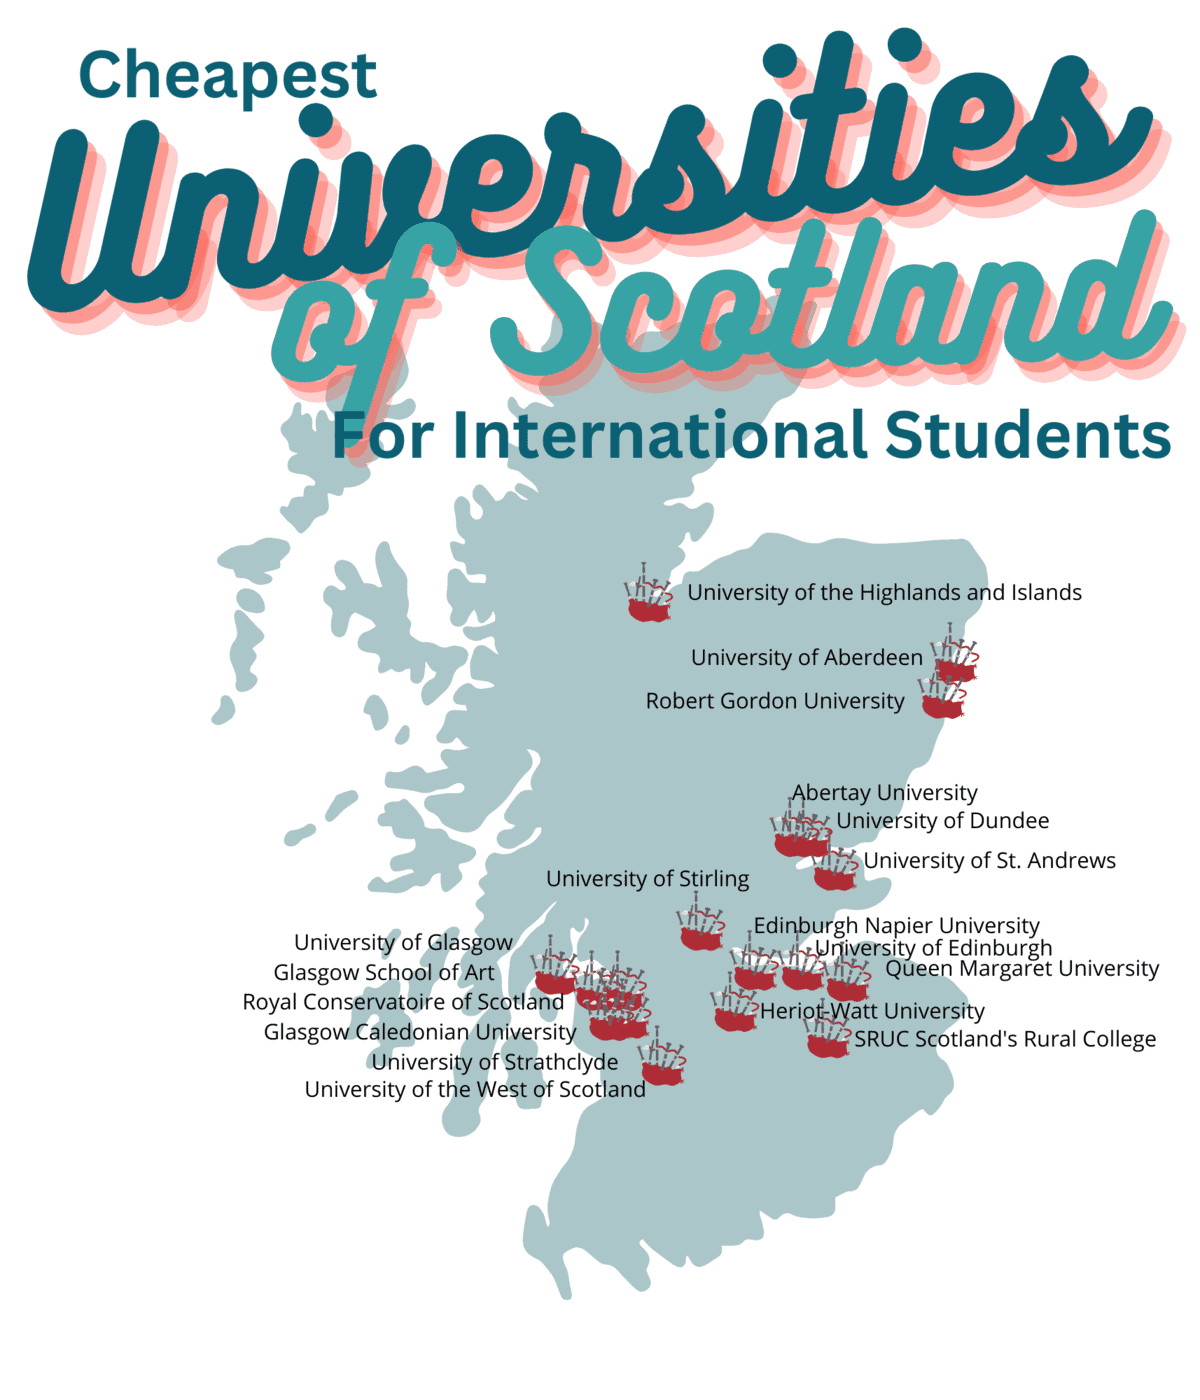 The Cheapest Colleges in Scotland (for International Students